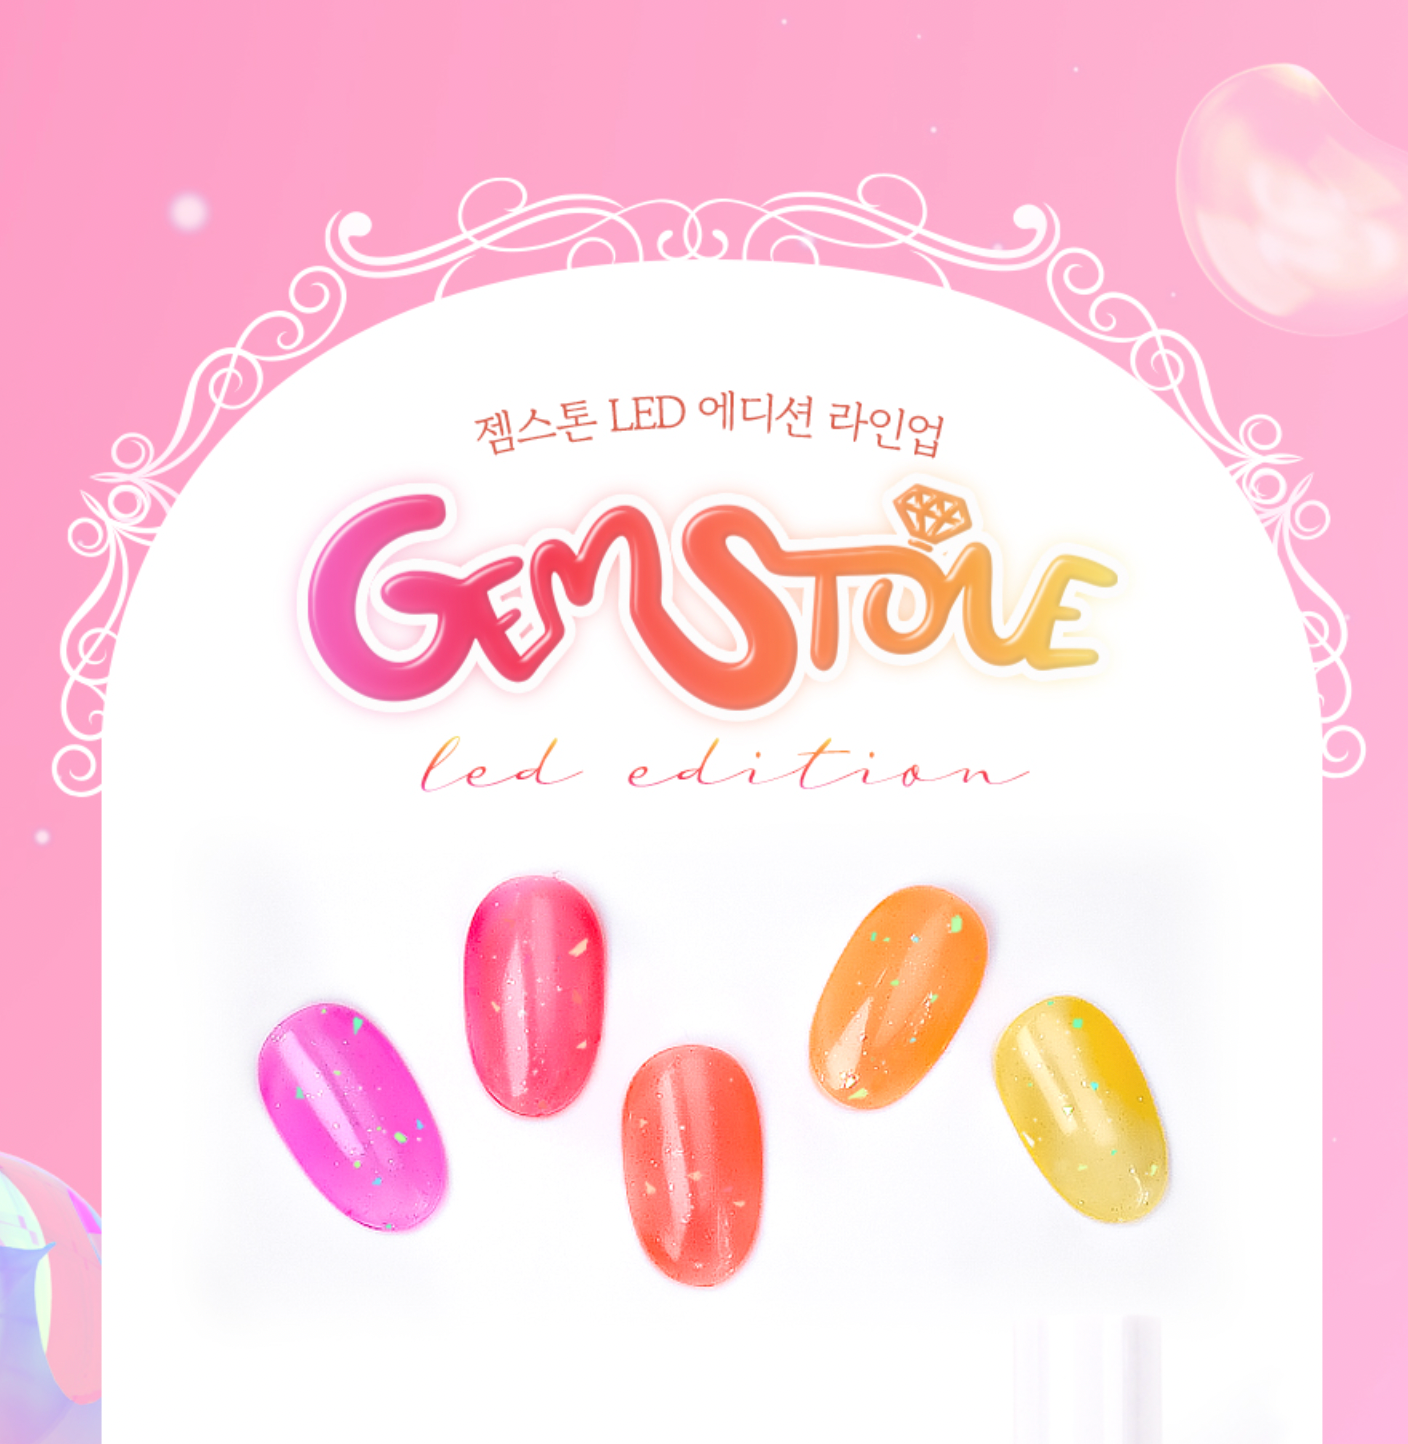 THE GEL Gemstone collection